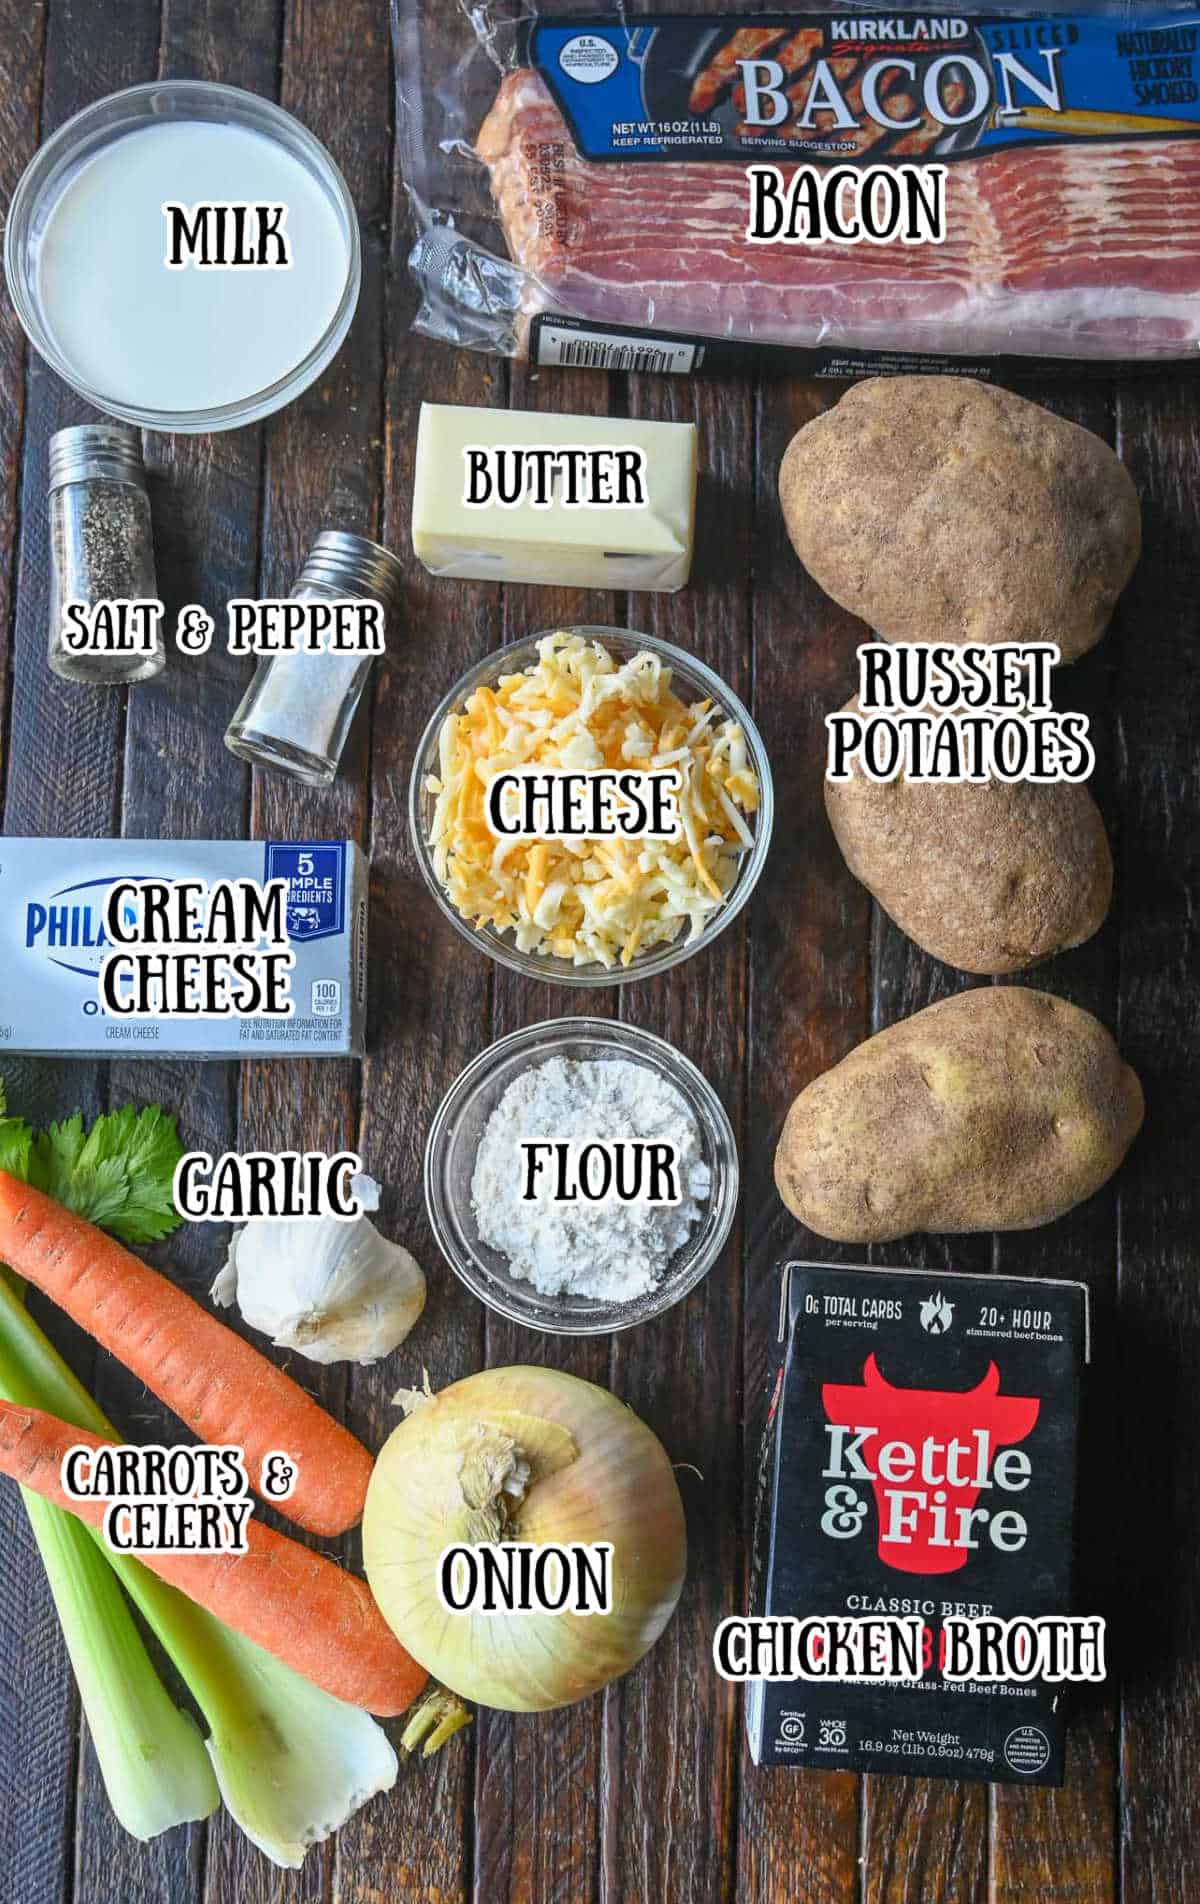 All the ingredients need for this potato soup.